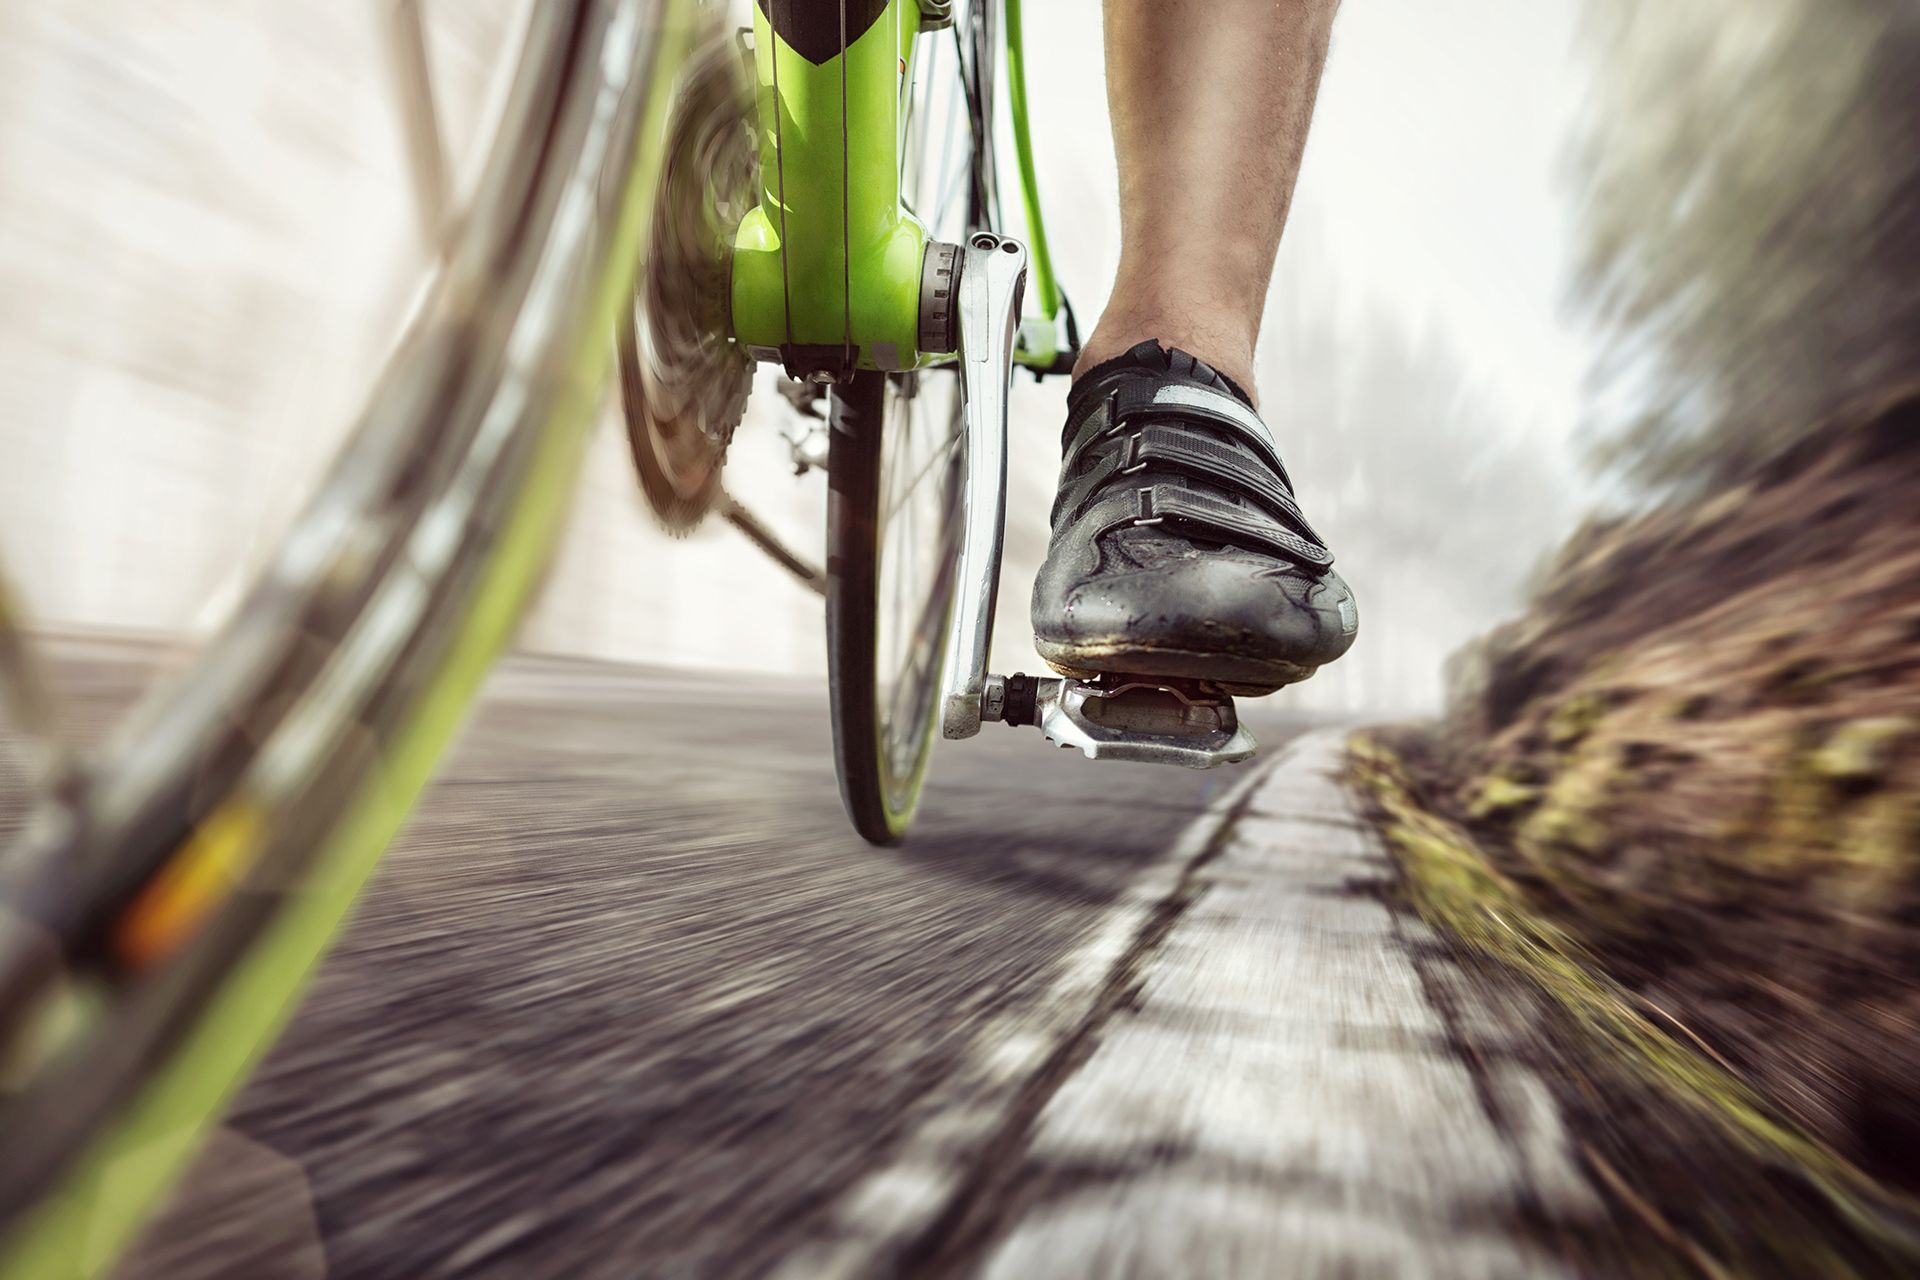 https://thefootpractice.com/wp-content/uploads/2020/06/the-foot-practice-podiatry-foot-care-singapore-cycling-1.jpg